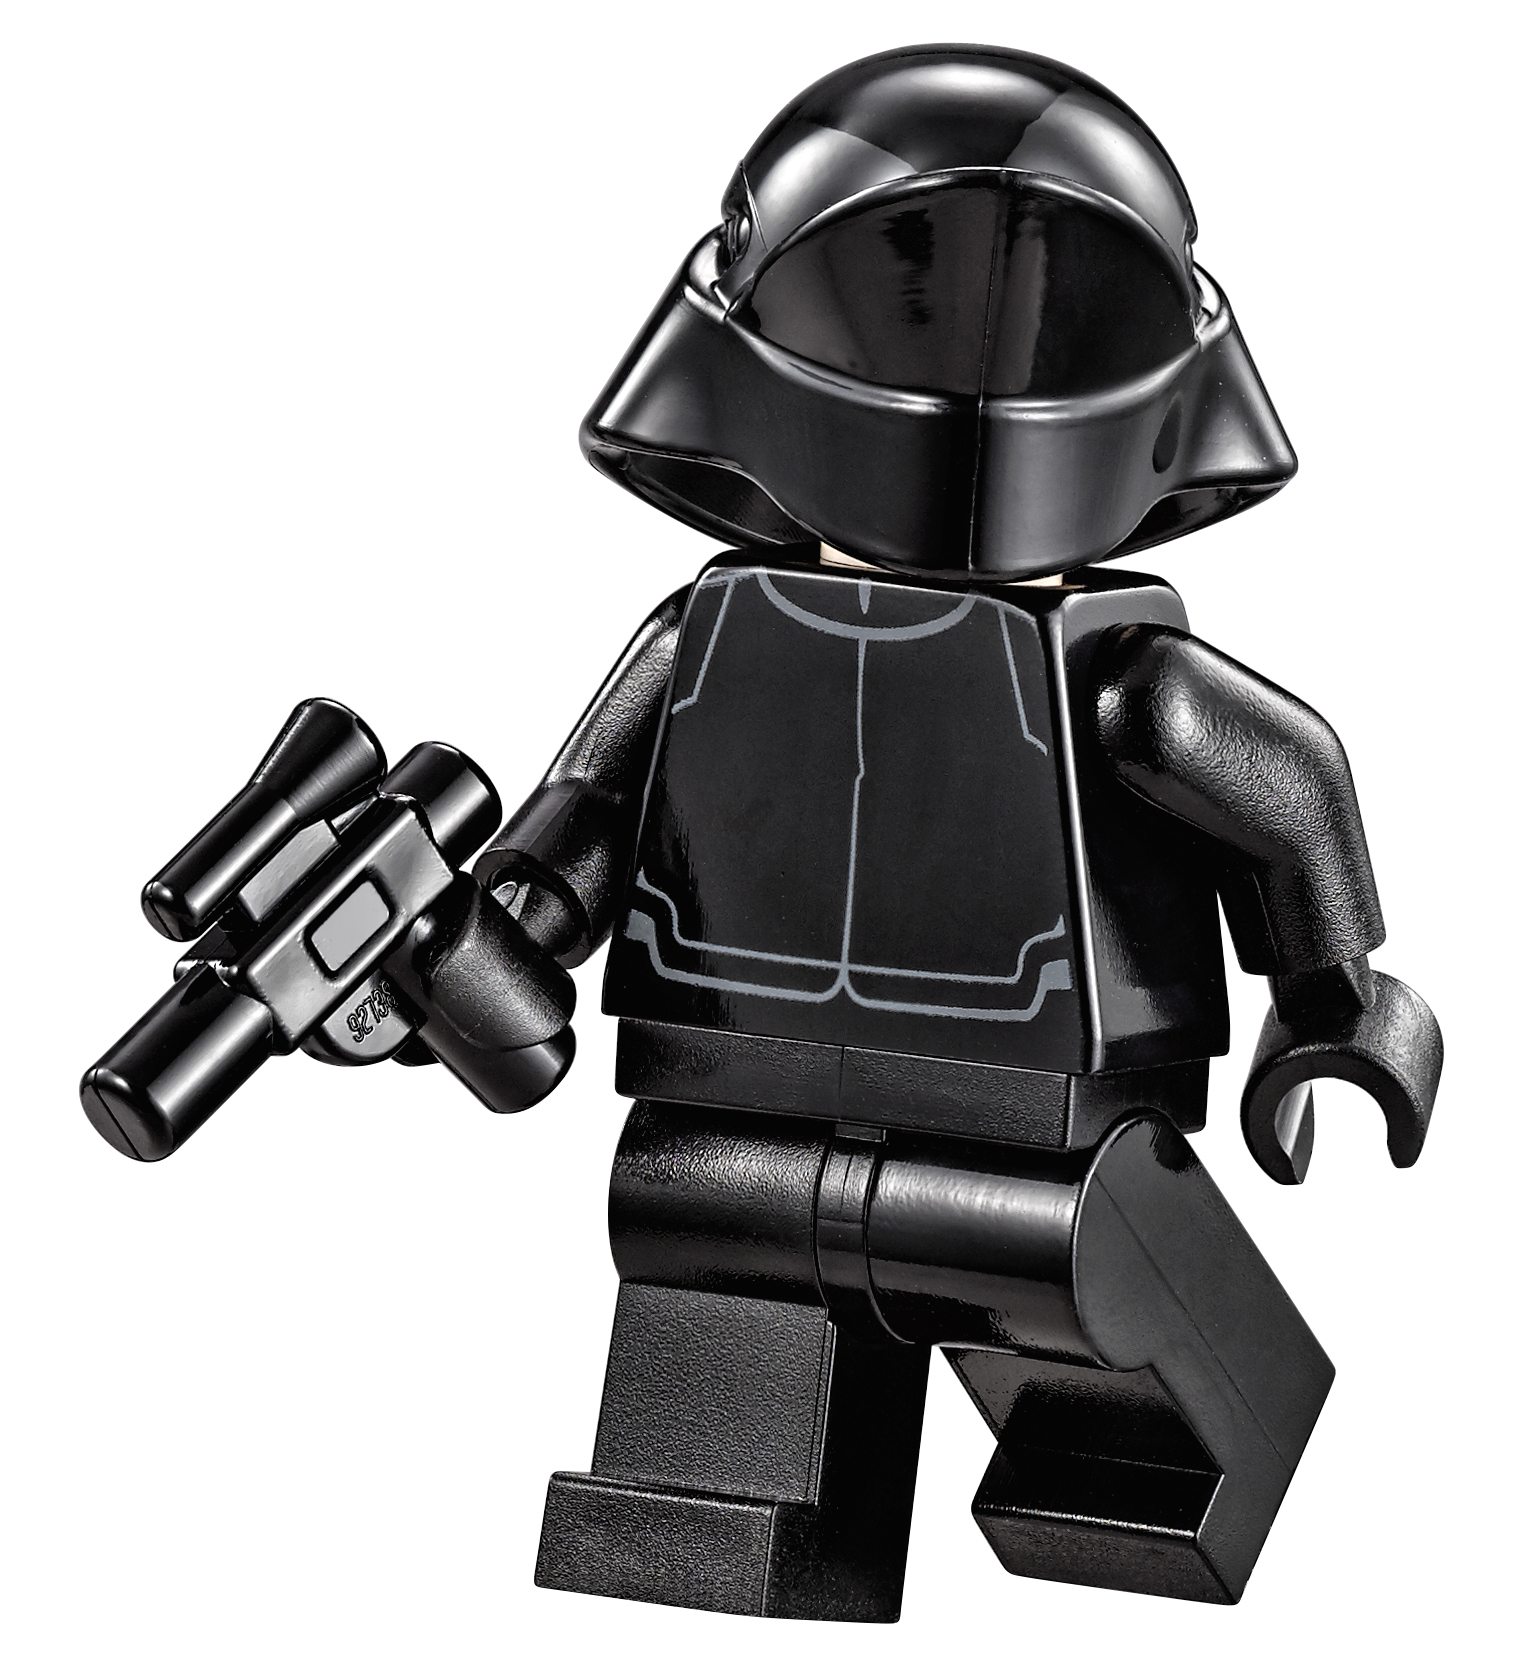 NEW Lego Star Wars  First Order Crewman Minifigure ~ The Force Awakens ~ 75132 